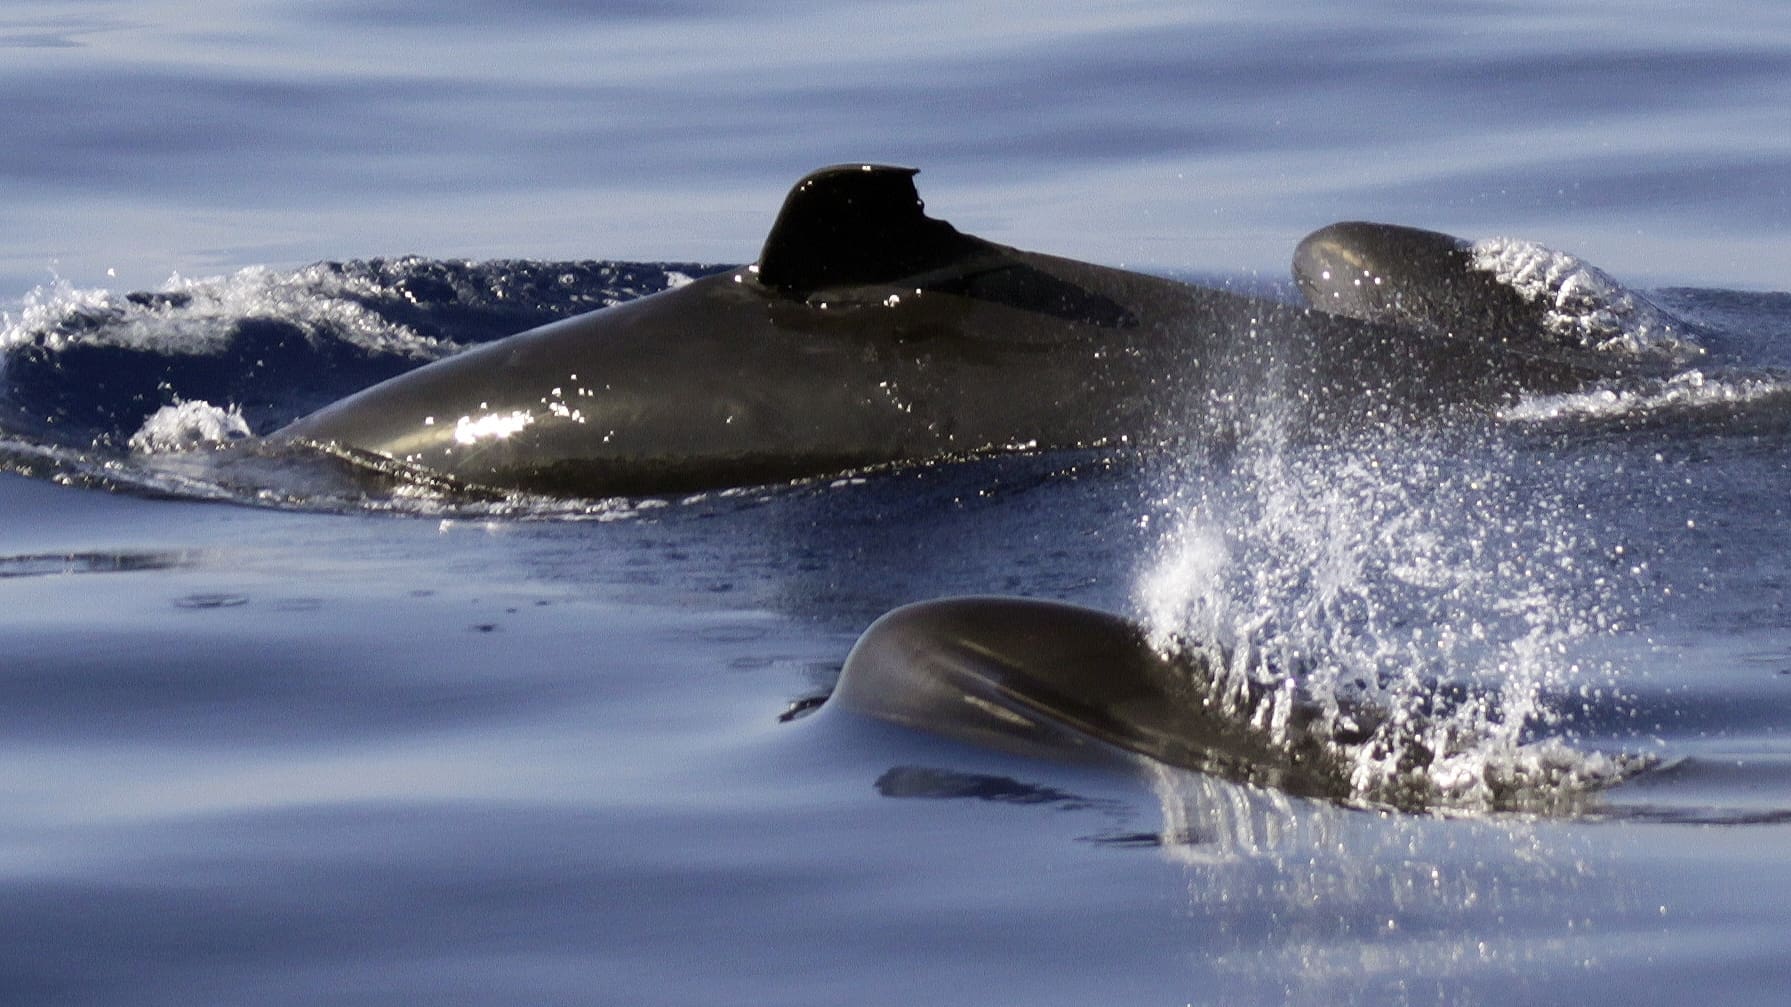 Bent dorsal fin in false killer whale with calf - most likely from fisheries interaction